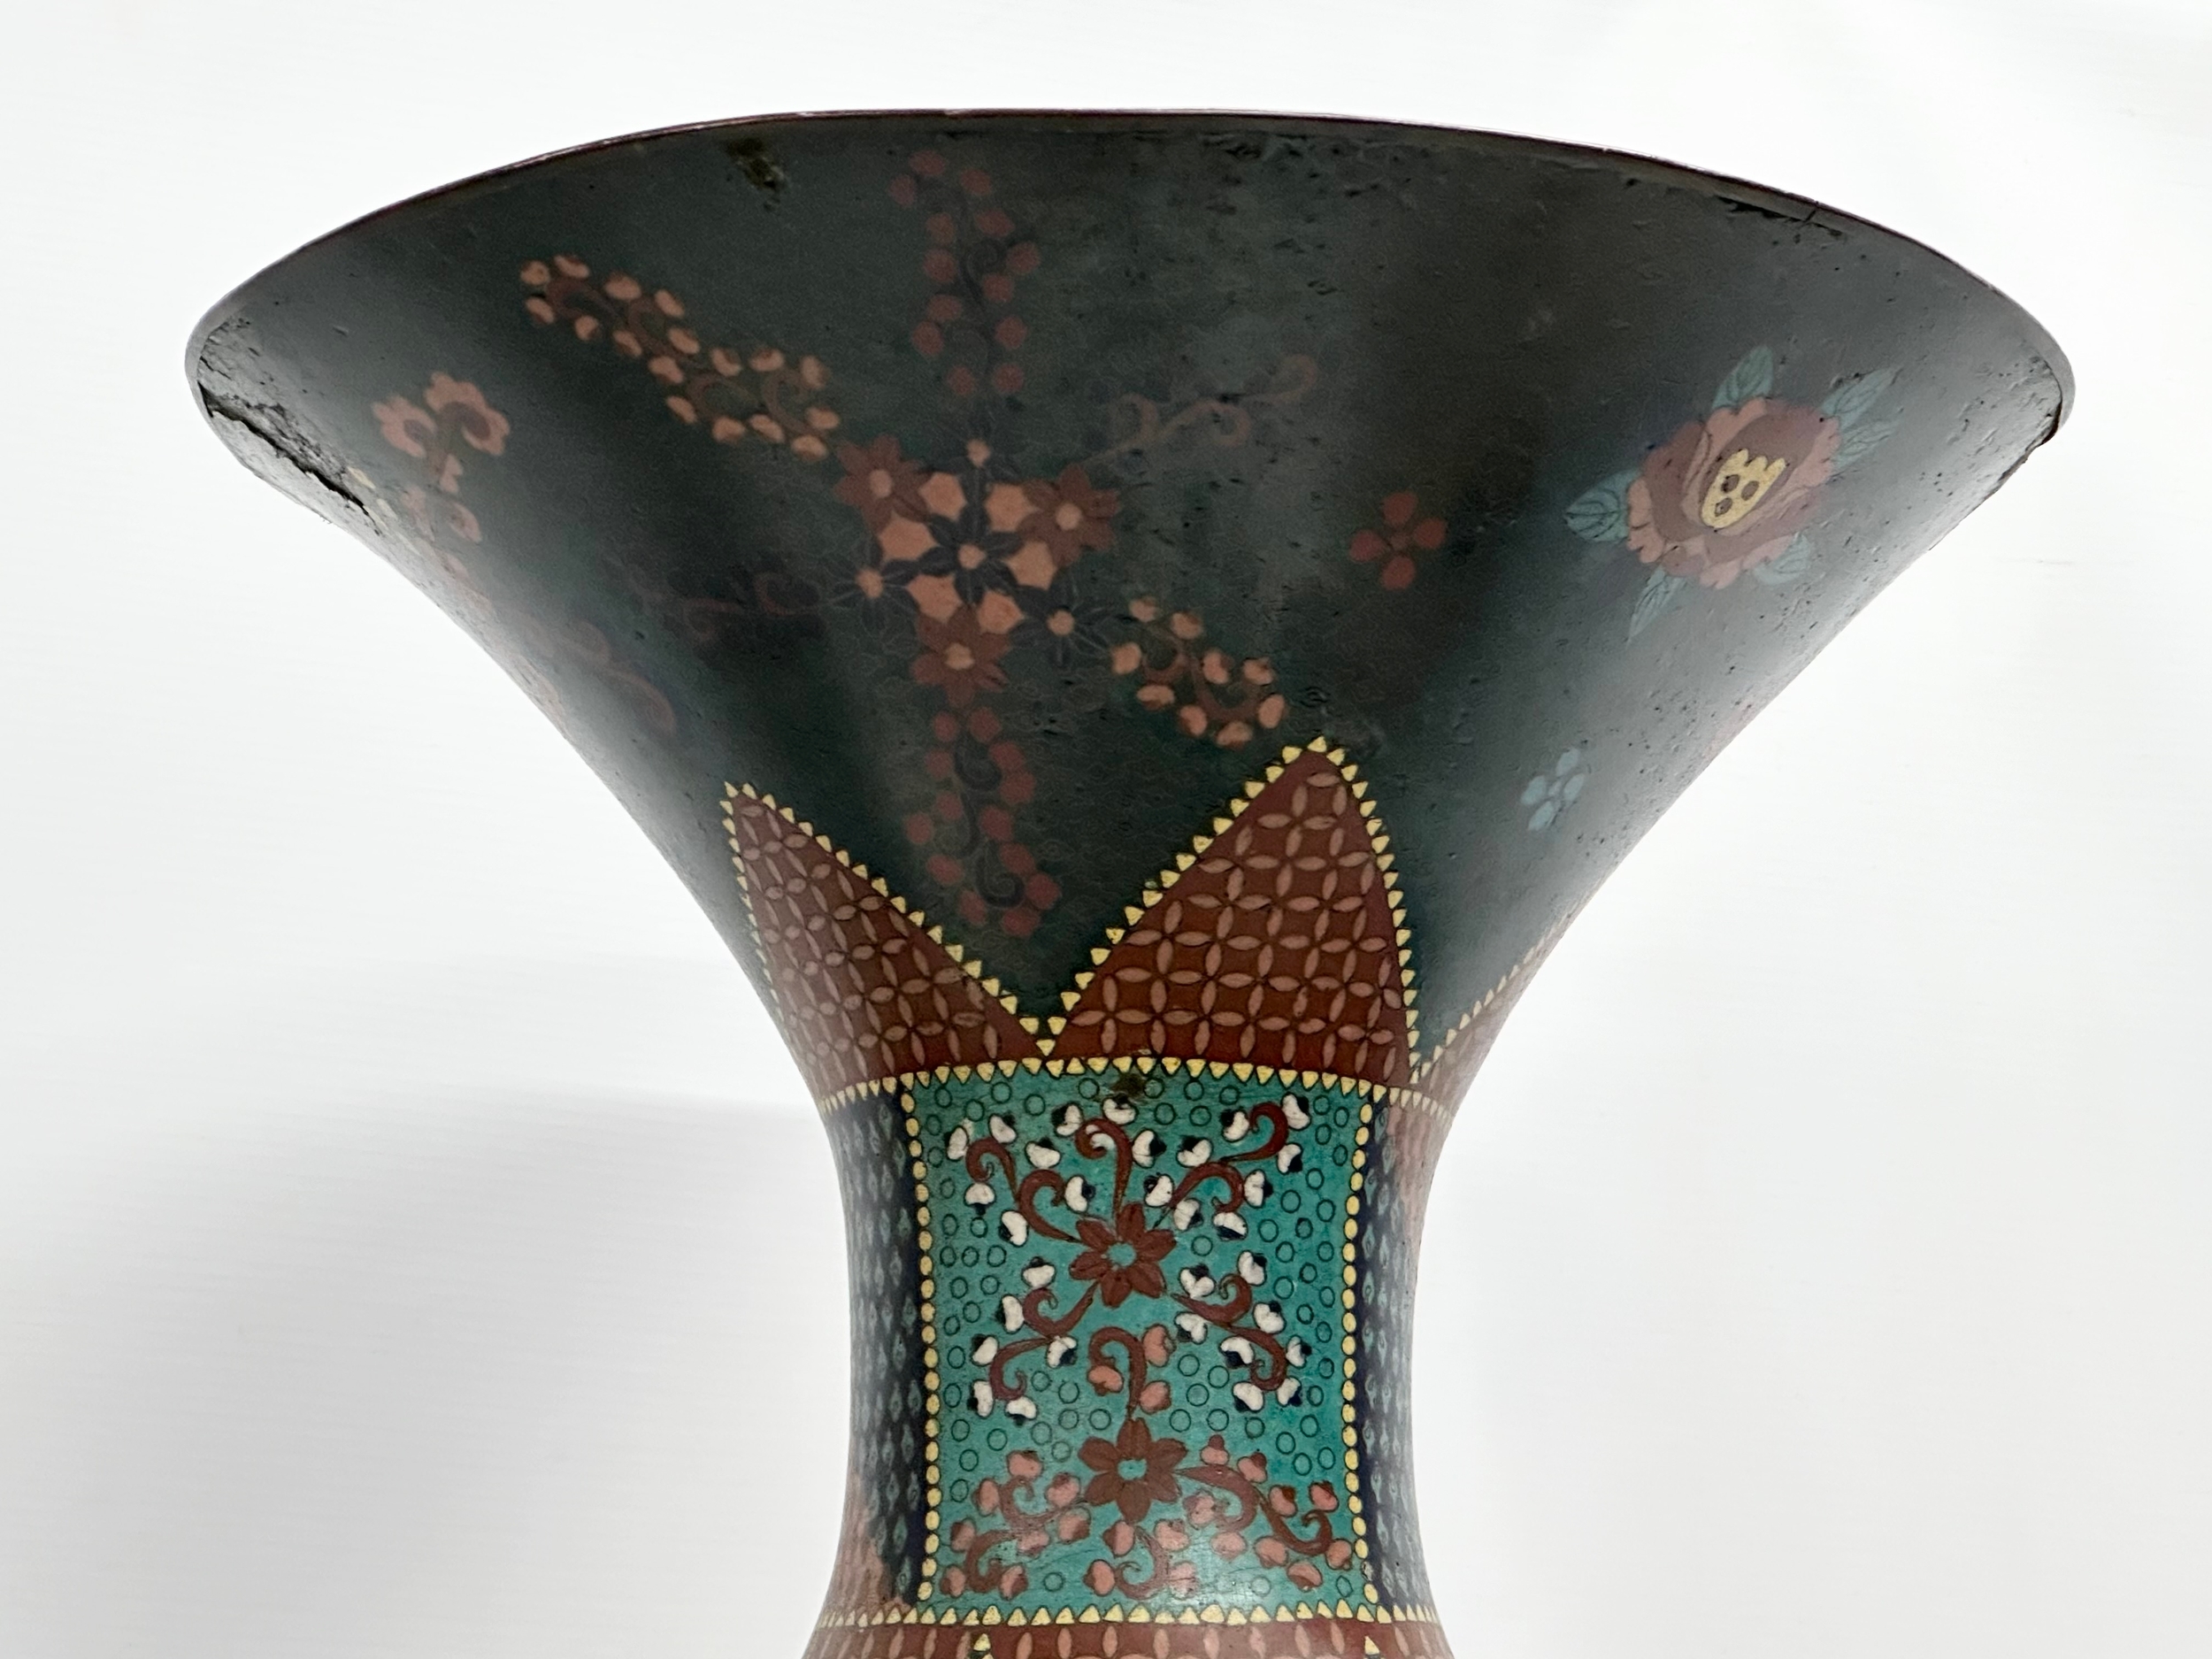 A very large late 19th century Japanese Meiji period cloisonné enamelled pot. Circa 1880-1900. - Image 4 of 7